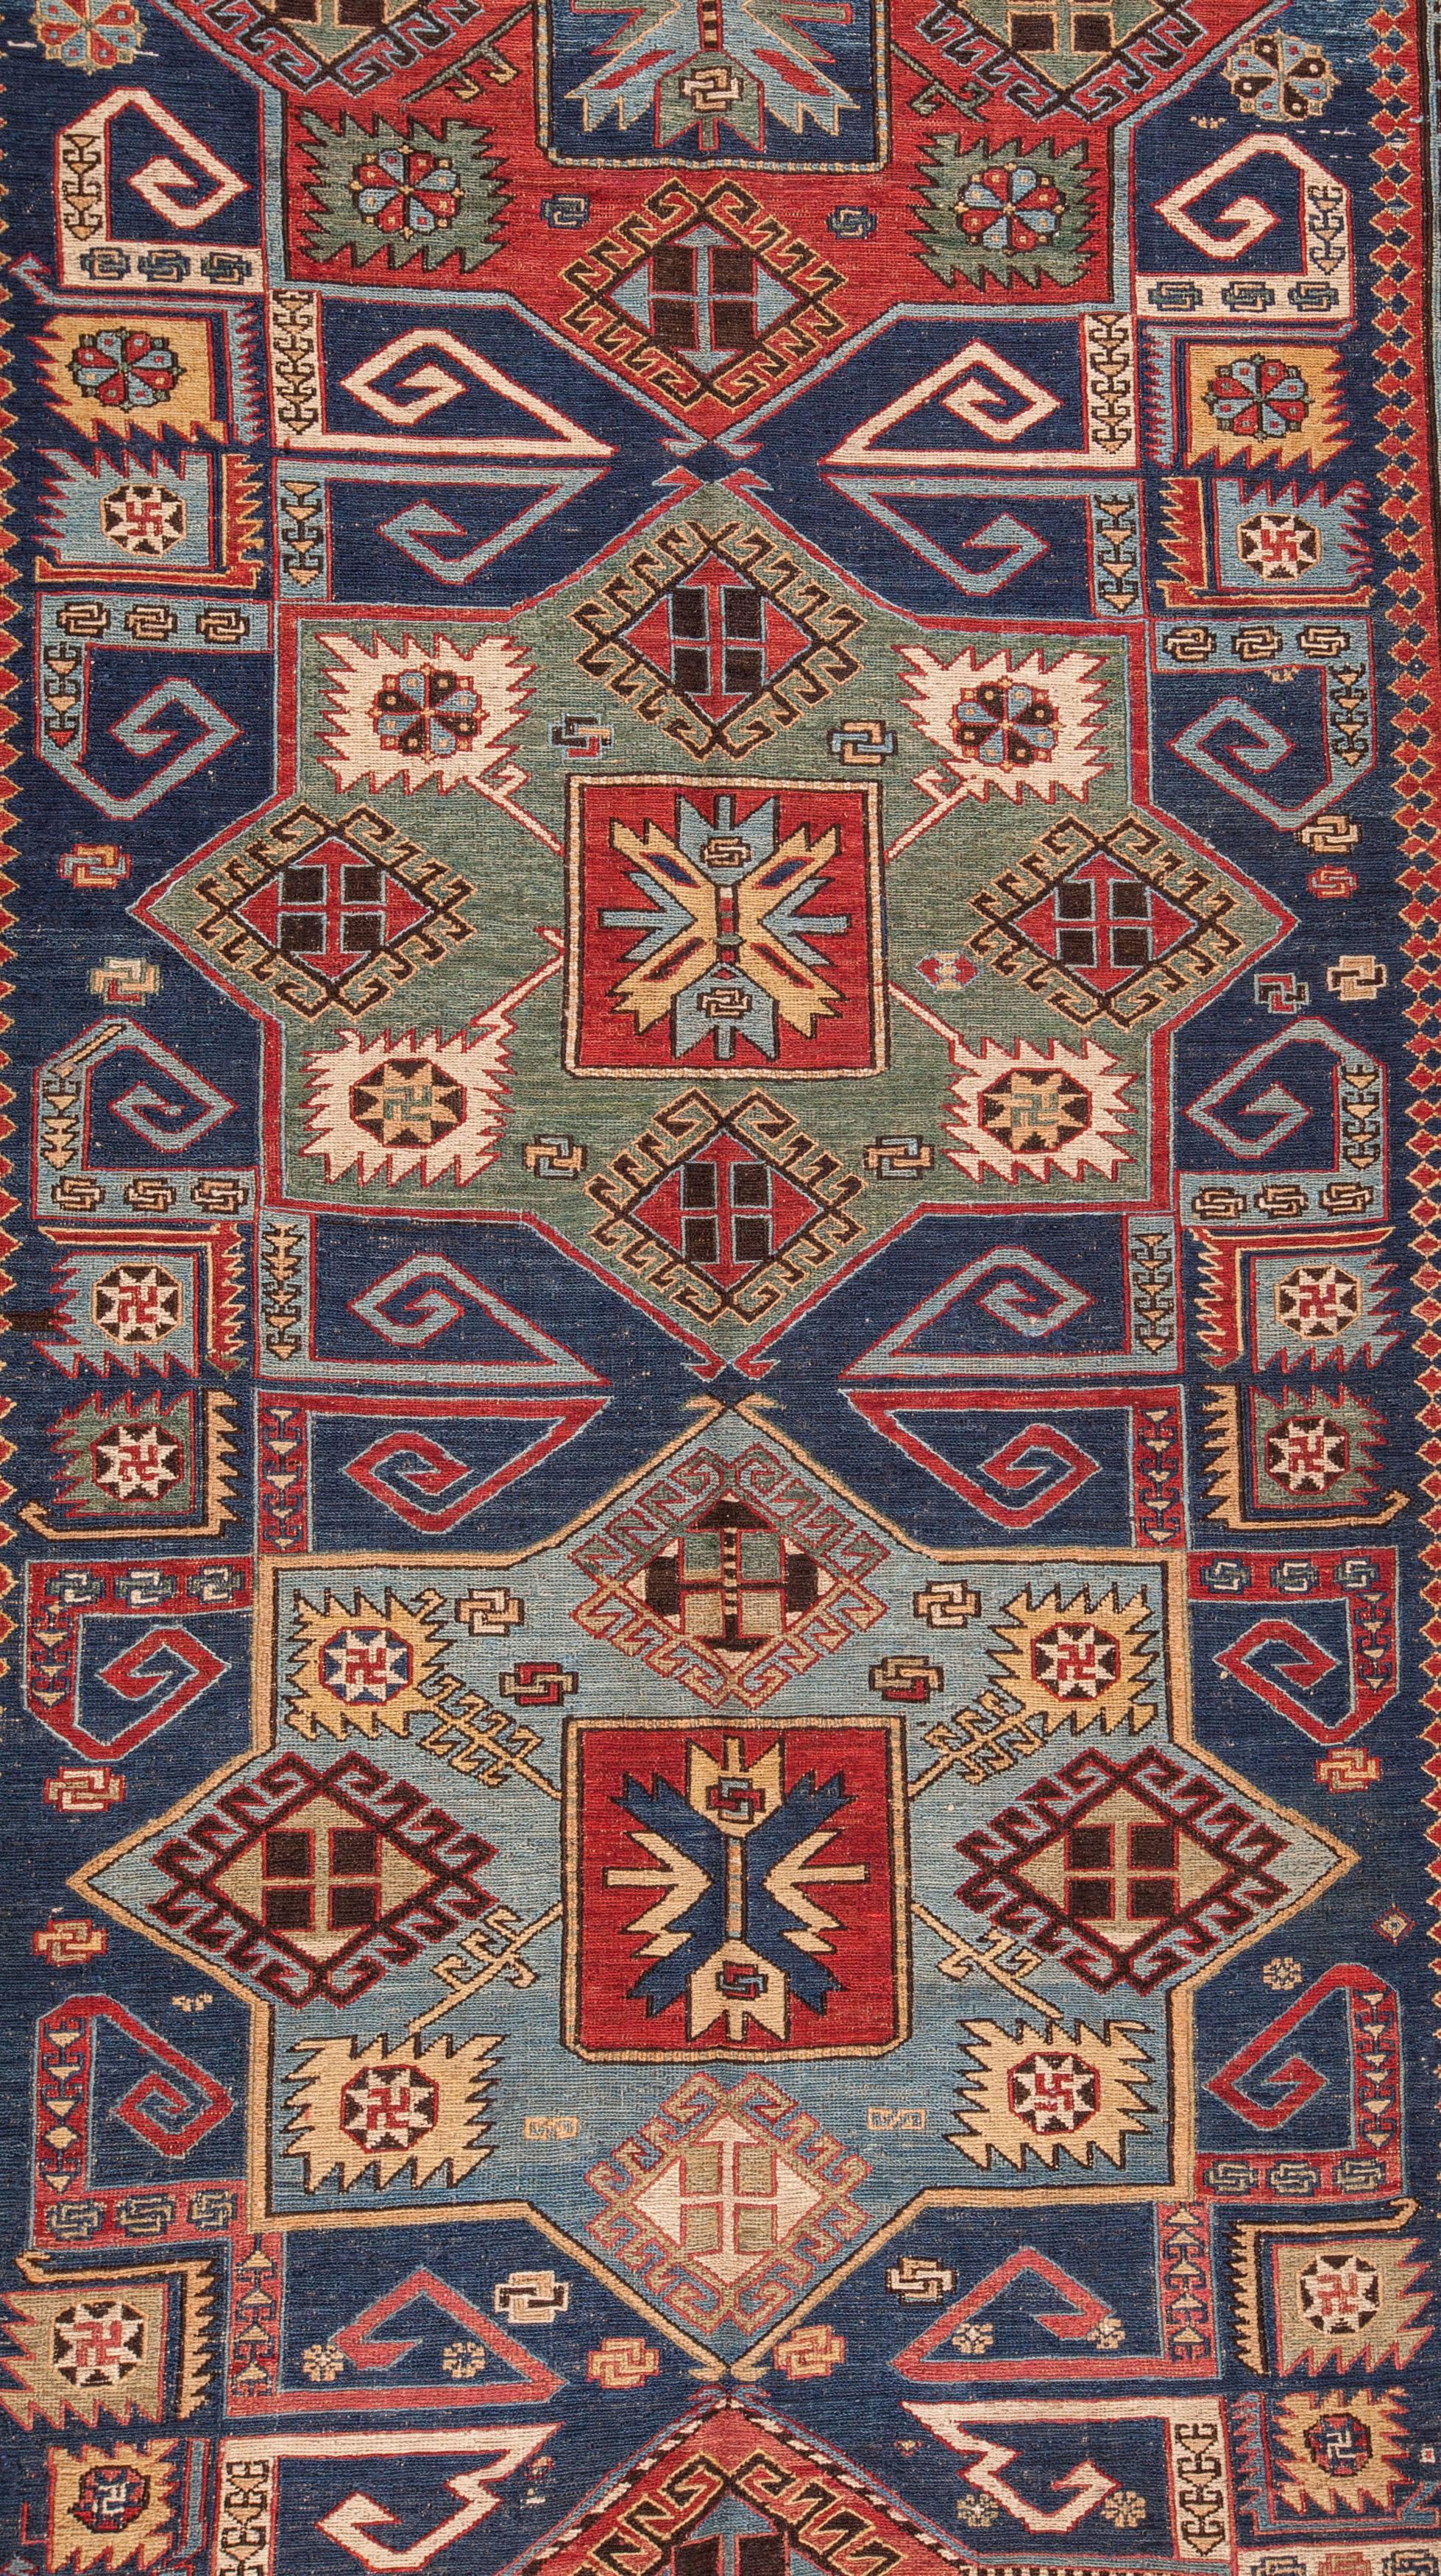 Professionally repaired, colourful long Sumak rug from Daghestan.